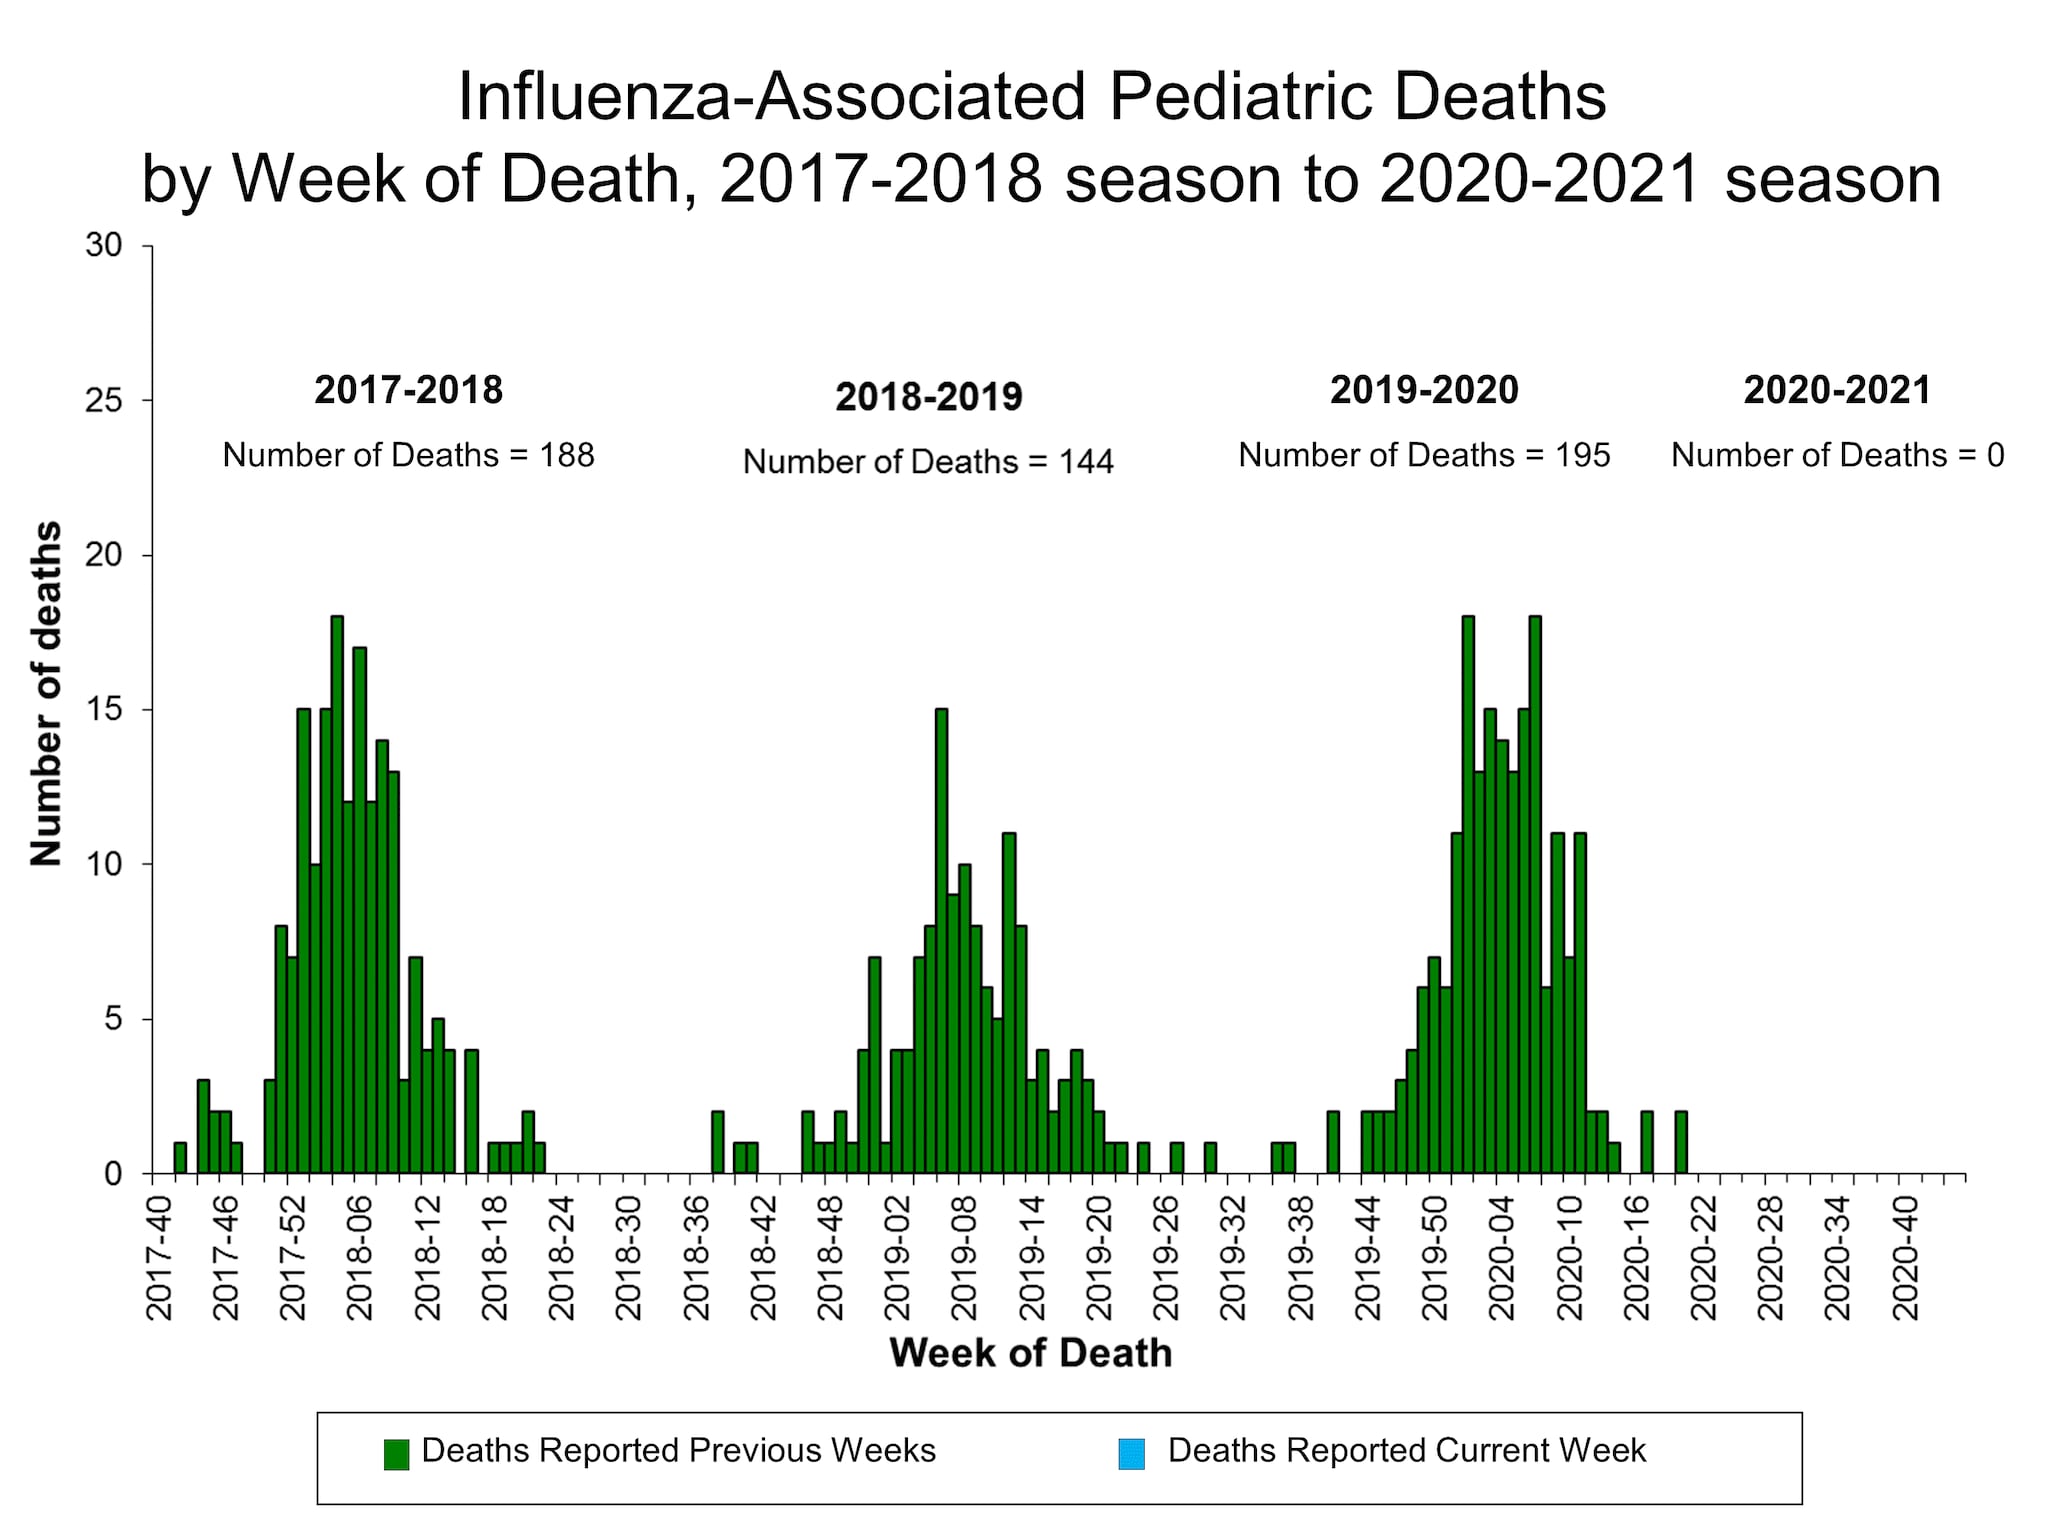 Number of Influenza-Associated Pediatric Deaths